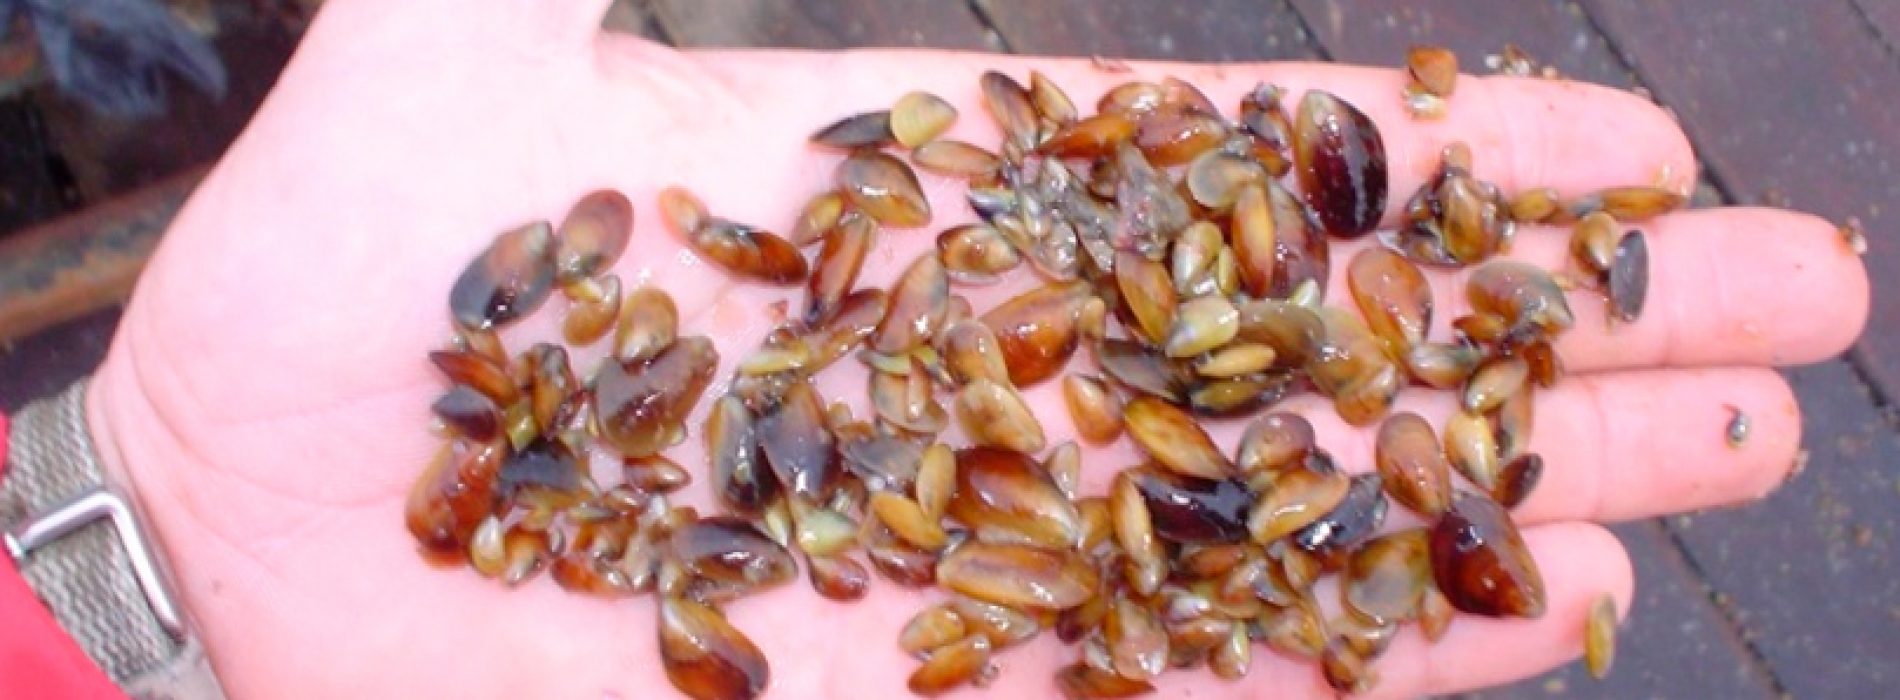 Innovative project will allow to recognize and count seeds of mussels